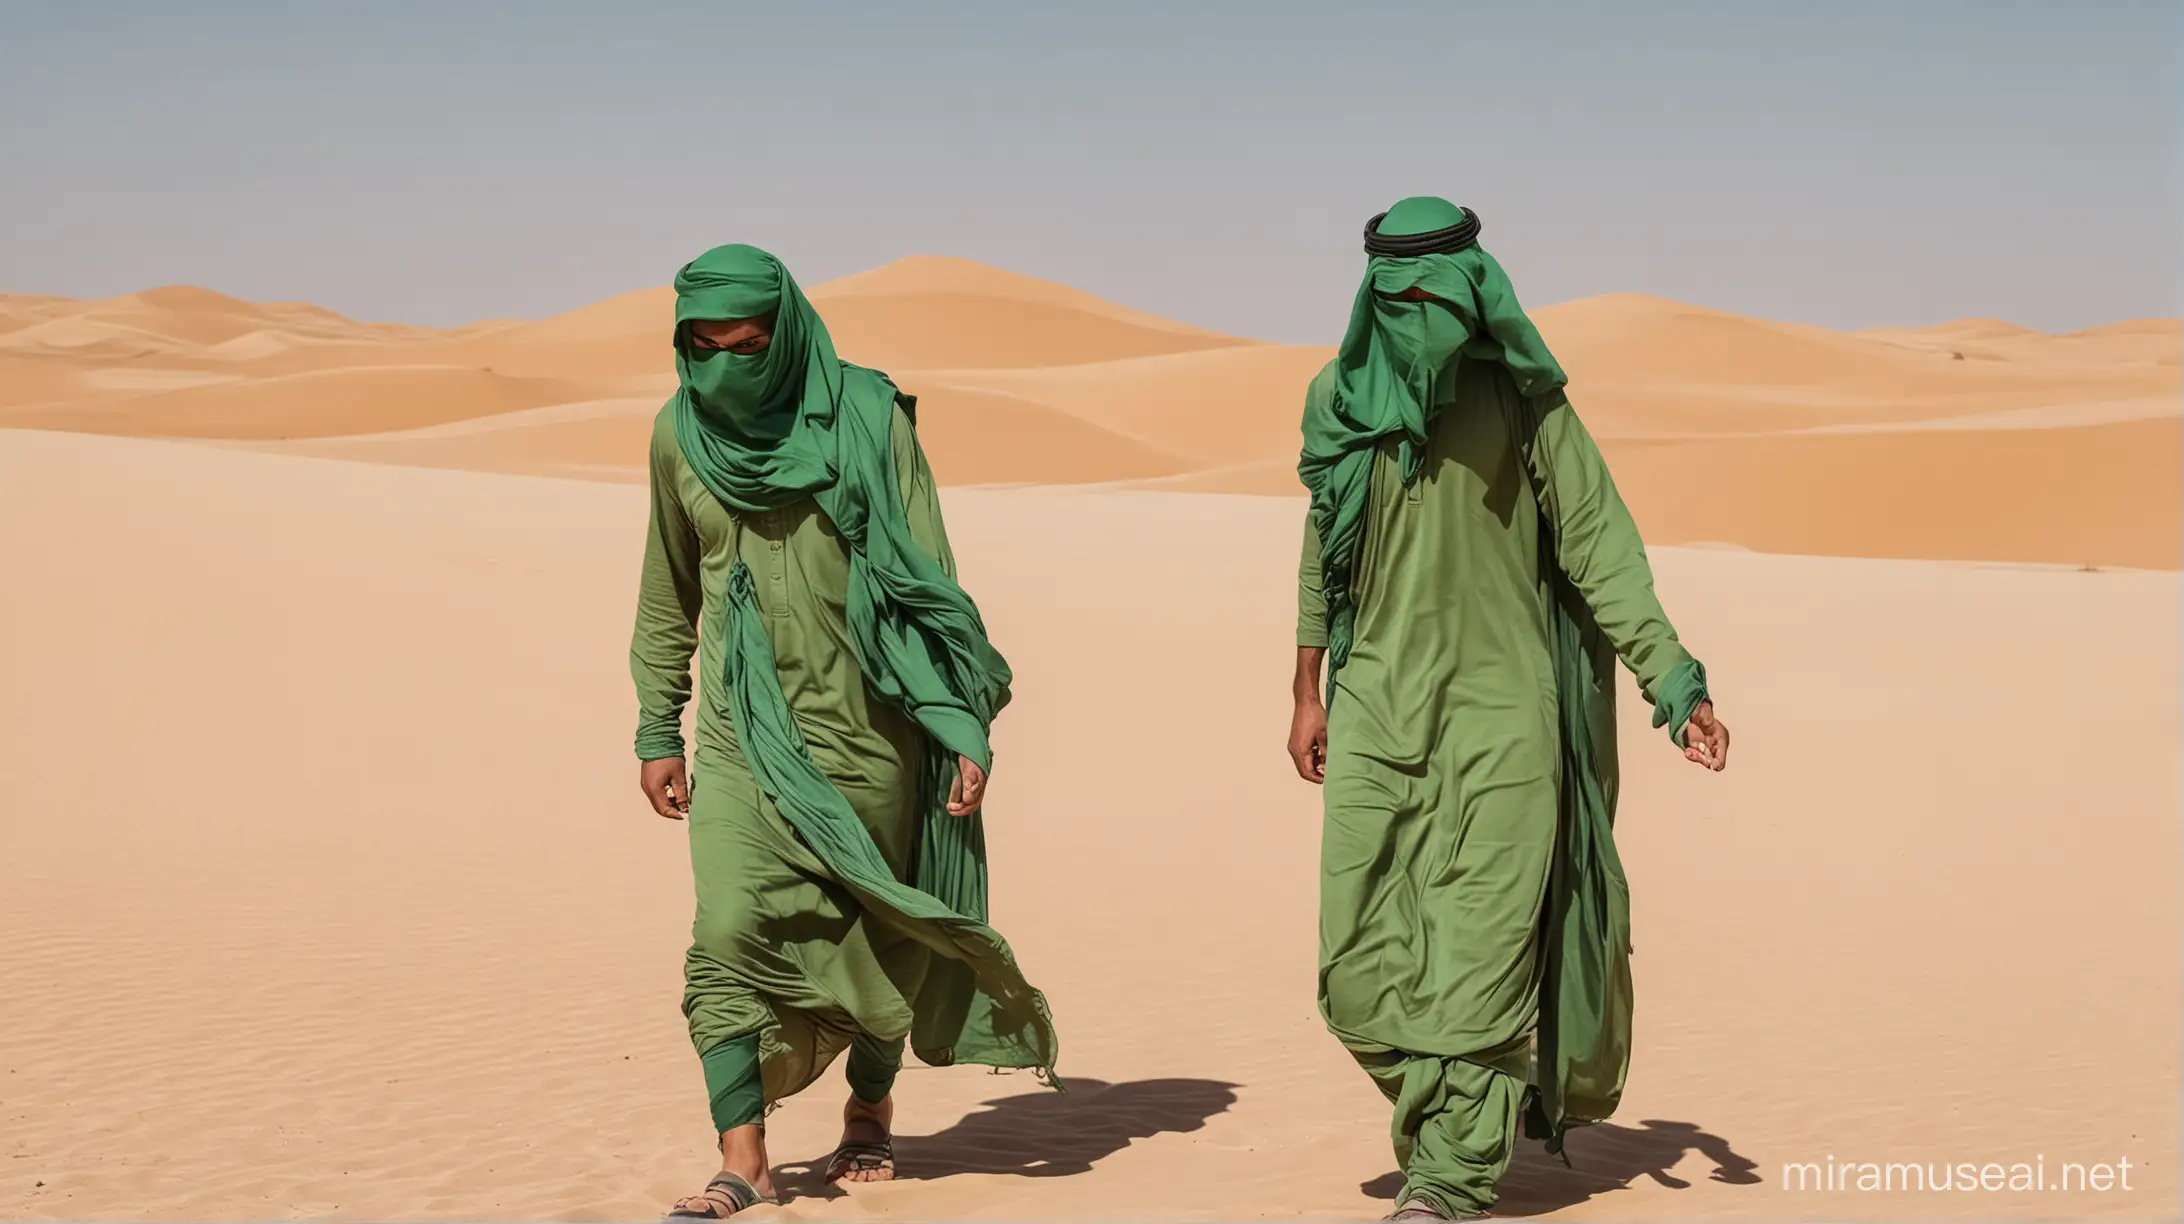 two arab men travelling in desert and one has hide his face through cloth and he is wearing green clothes